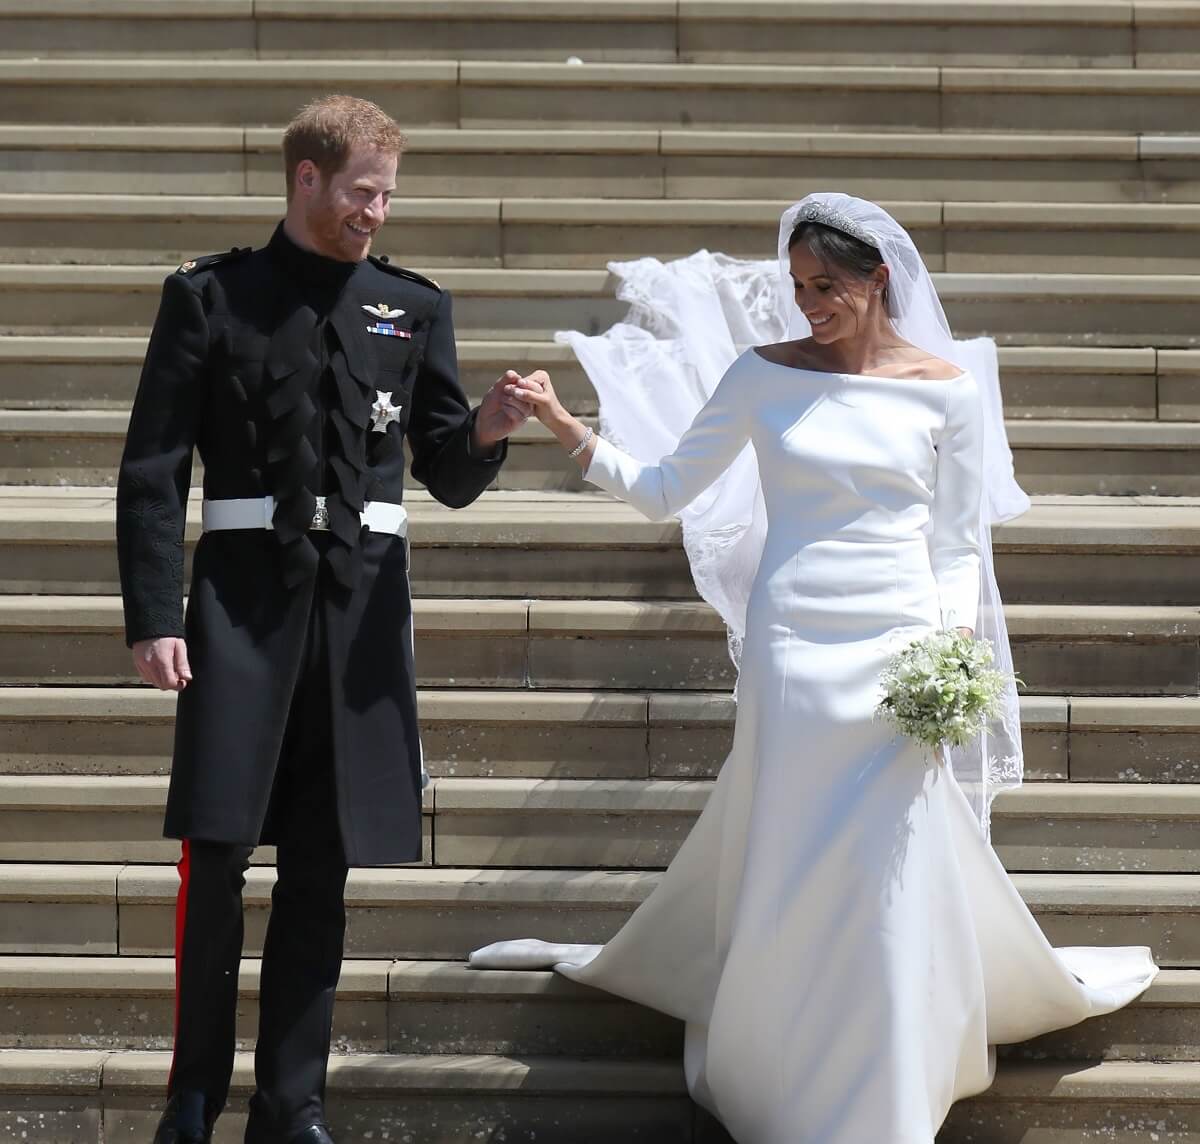 Prince Harry and Meghan Markle, whose dress criticized for being baggy, leaving St George's Chapel after their wedding ceremony